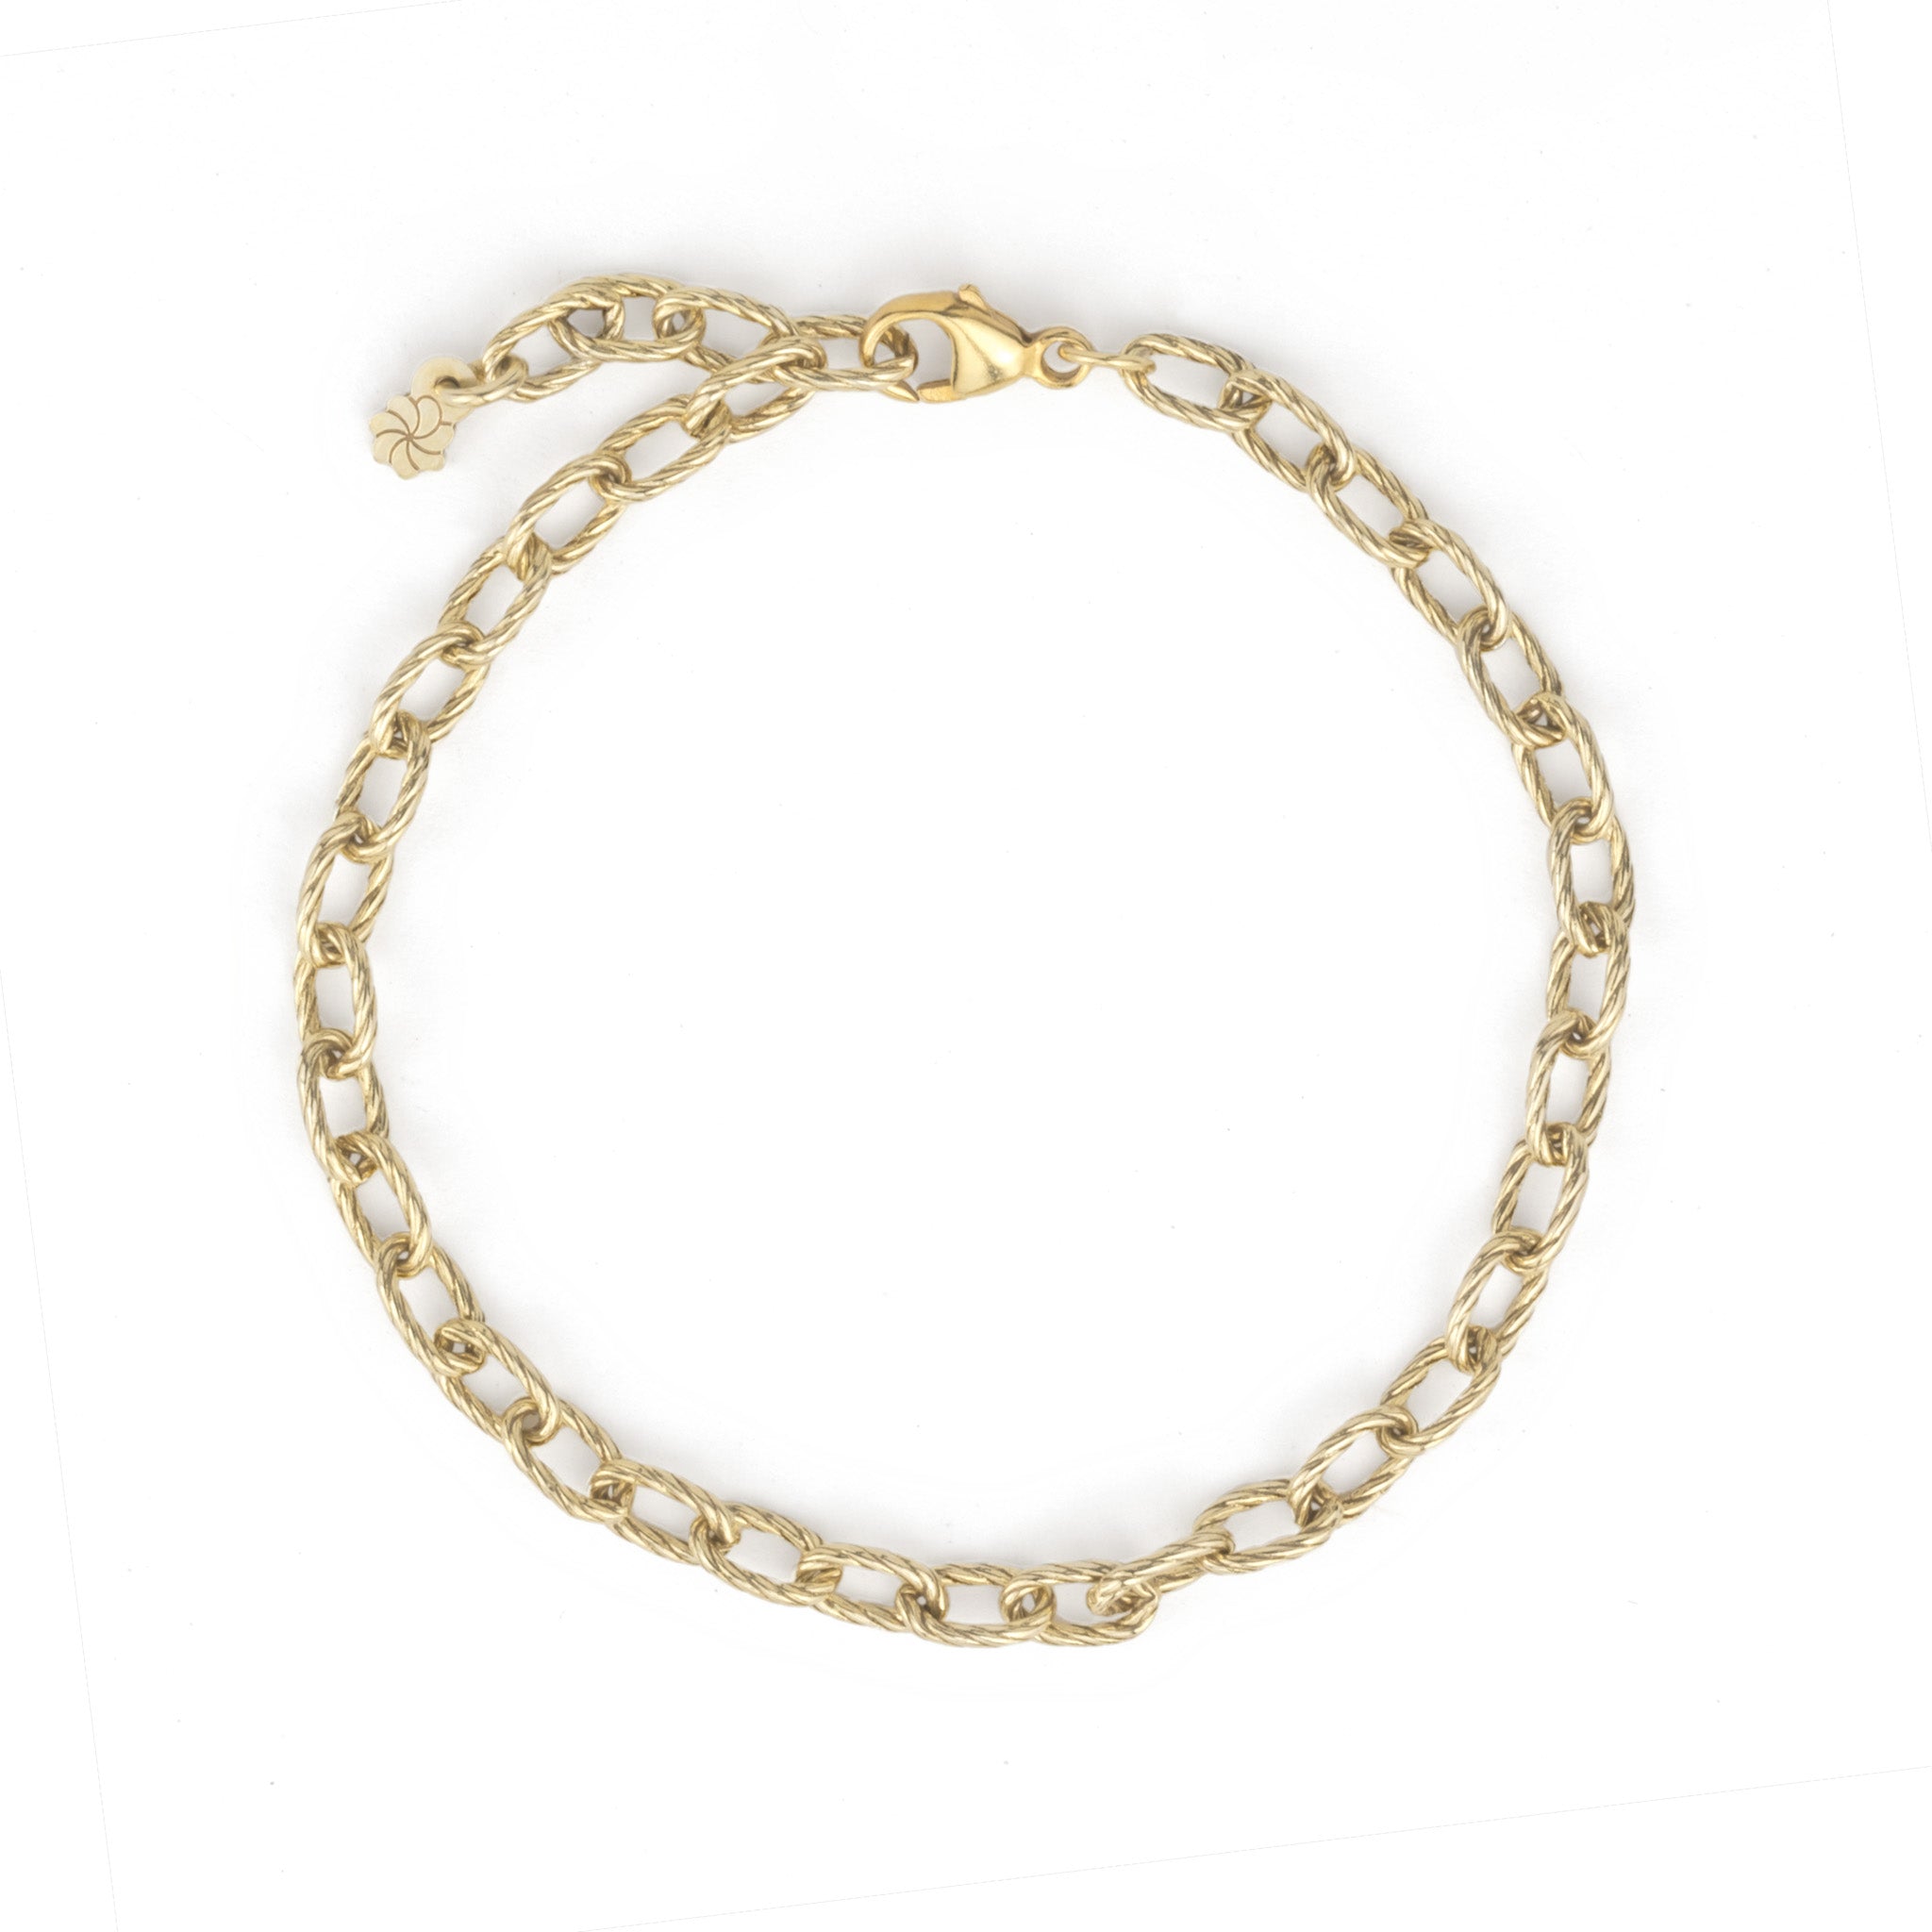 An Aiden Jae Banyan Cable Chain Bracelet on a white background.